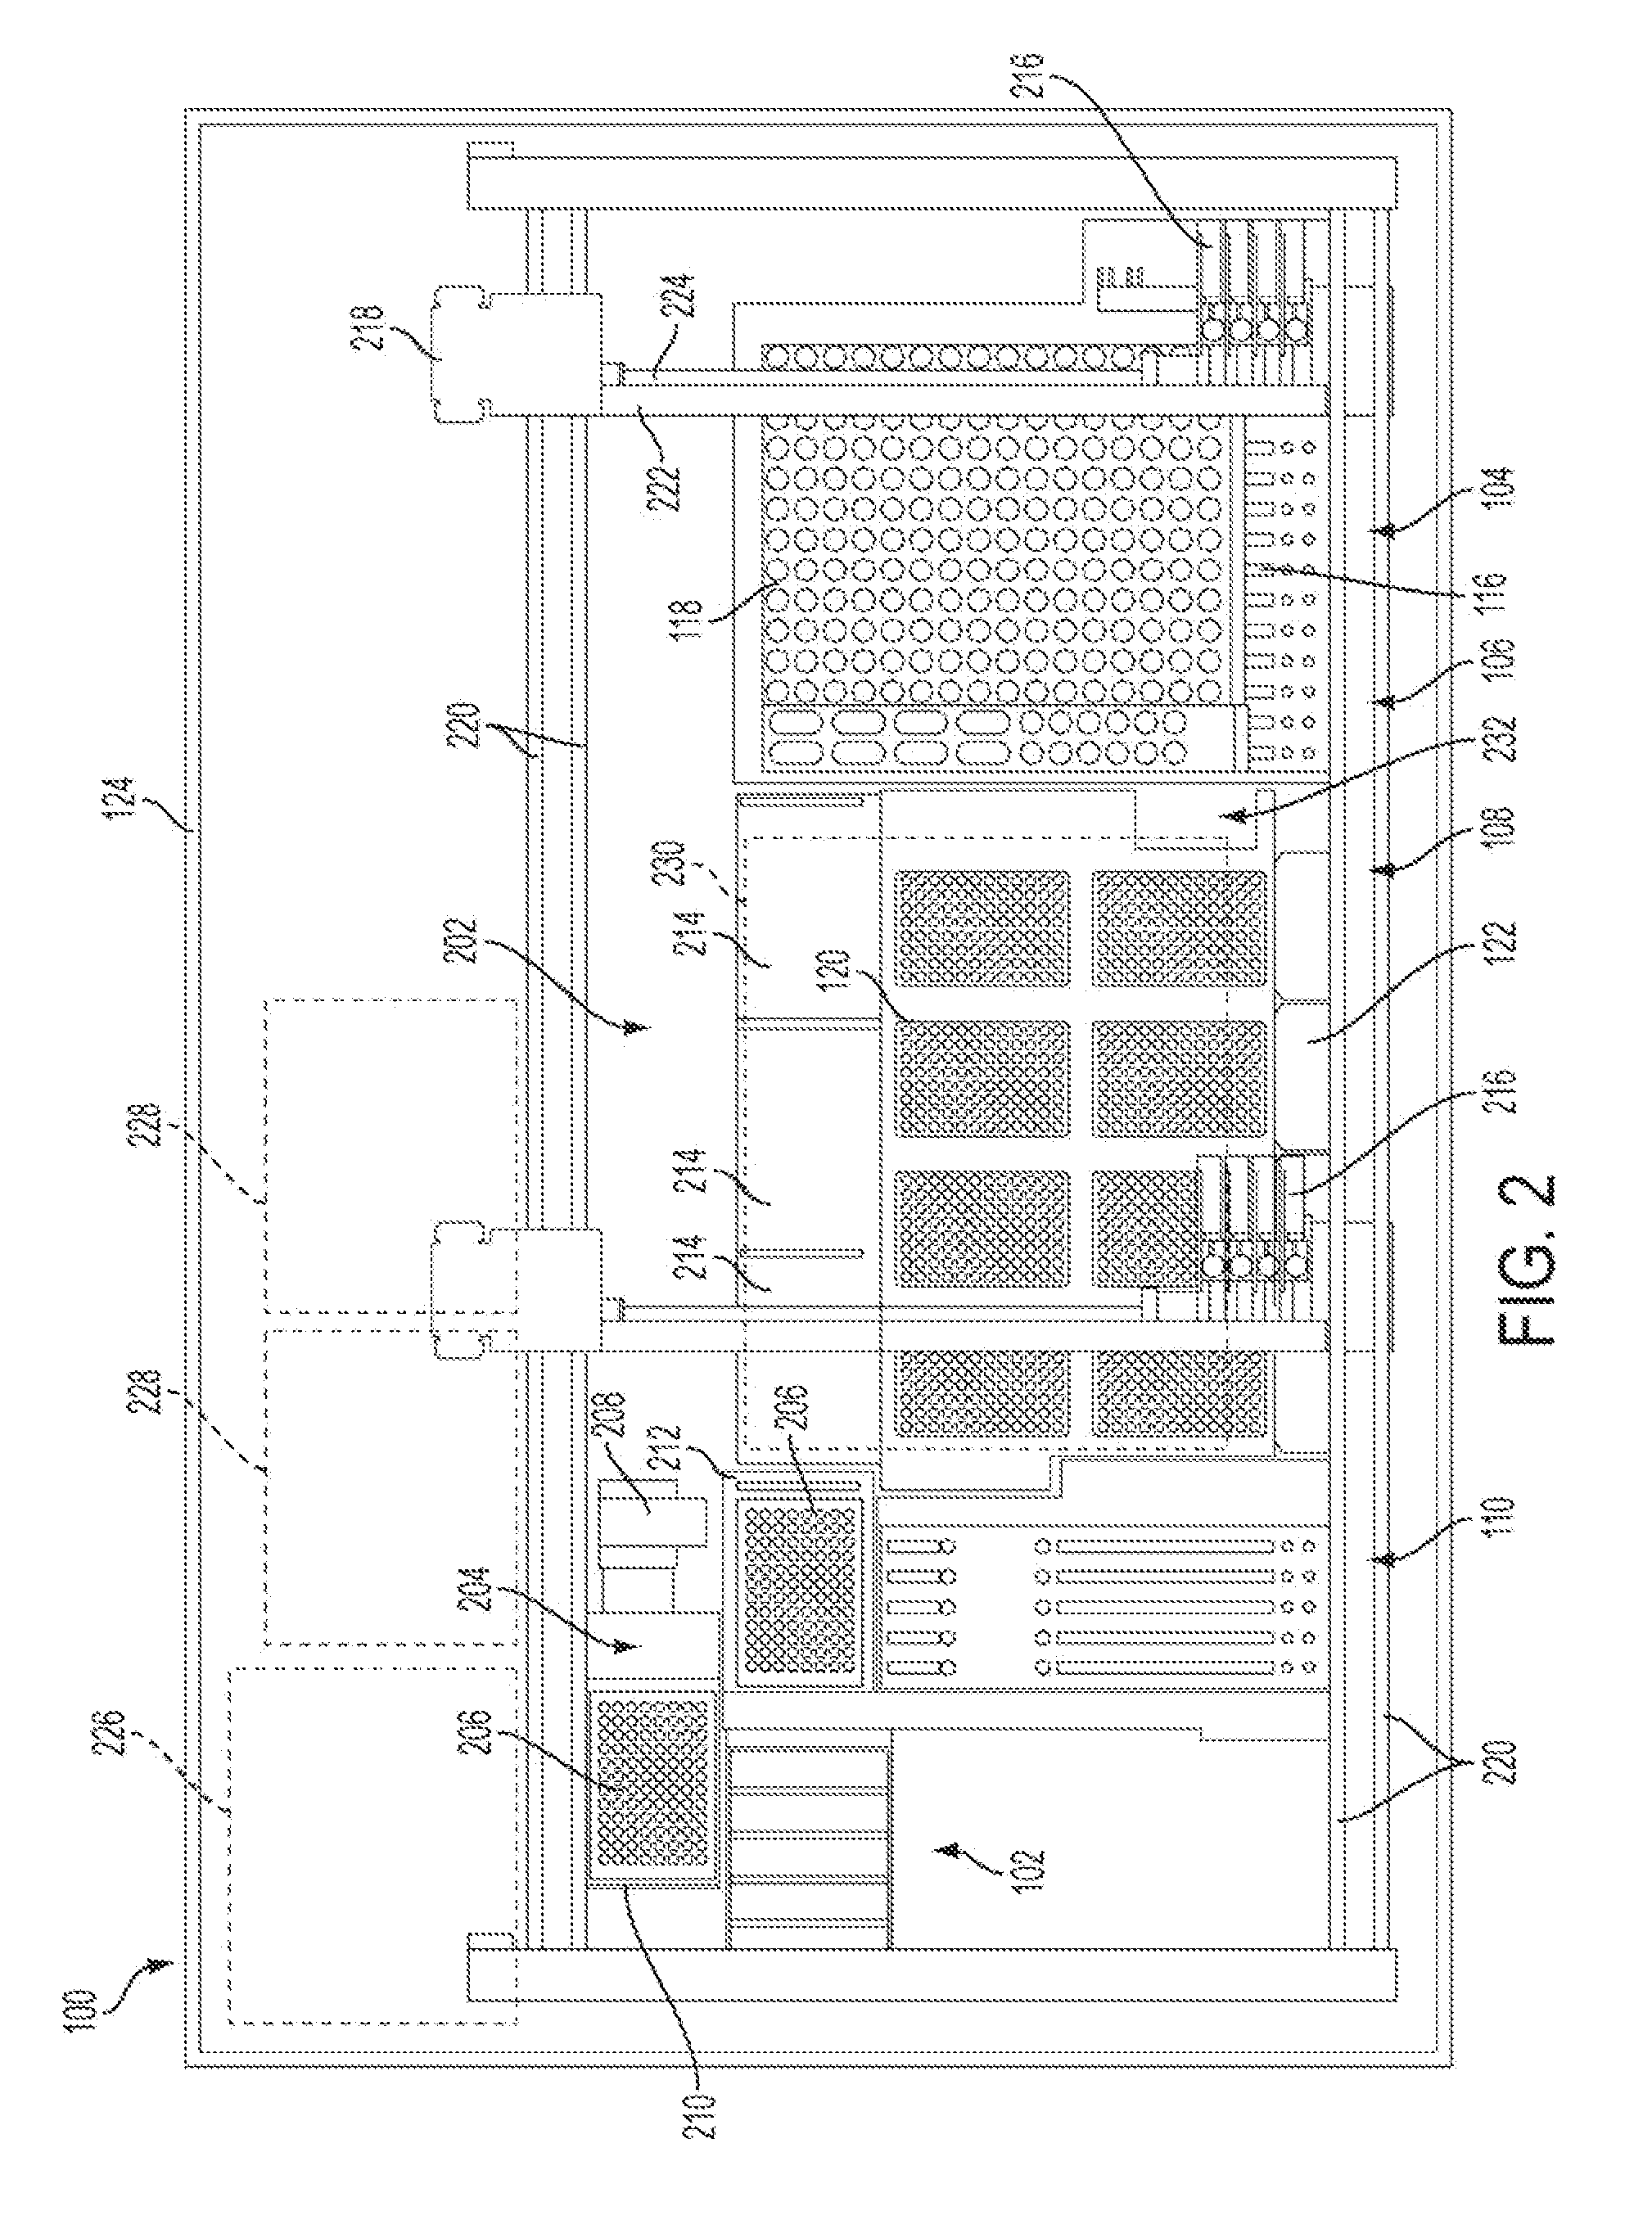 Multiple-input Analytical System